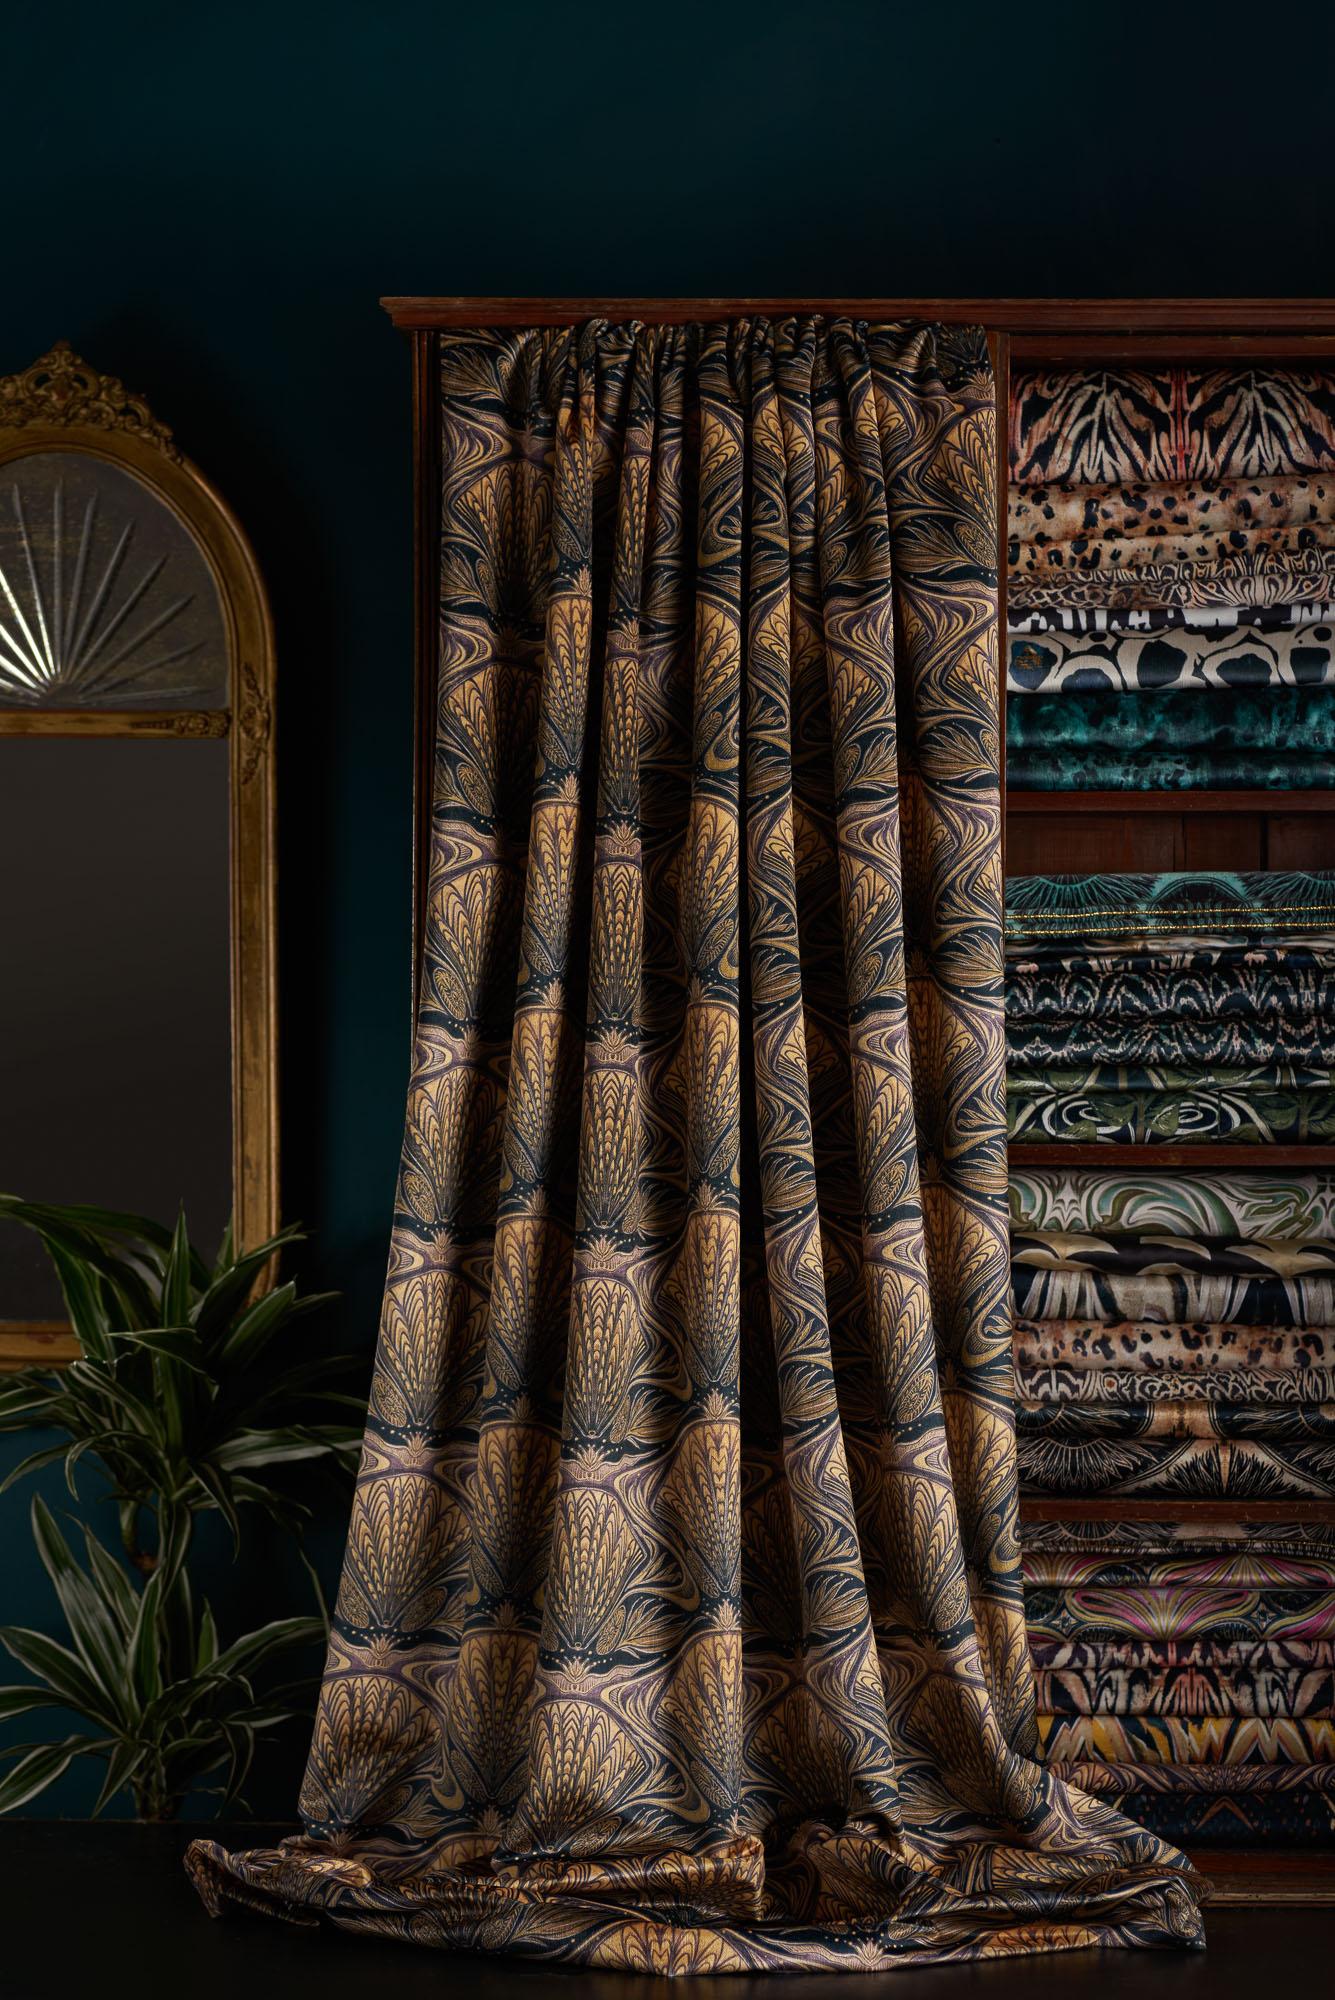 Our Oyster design has Art Nouveau vibes, and is a painted lino cut by Anna, with a detailed and elegant design and a relaxed, luxurious feel. Tones of black, gold and mauve shimmer on our short pile velvet, the perfect base for this deep and